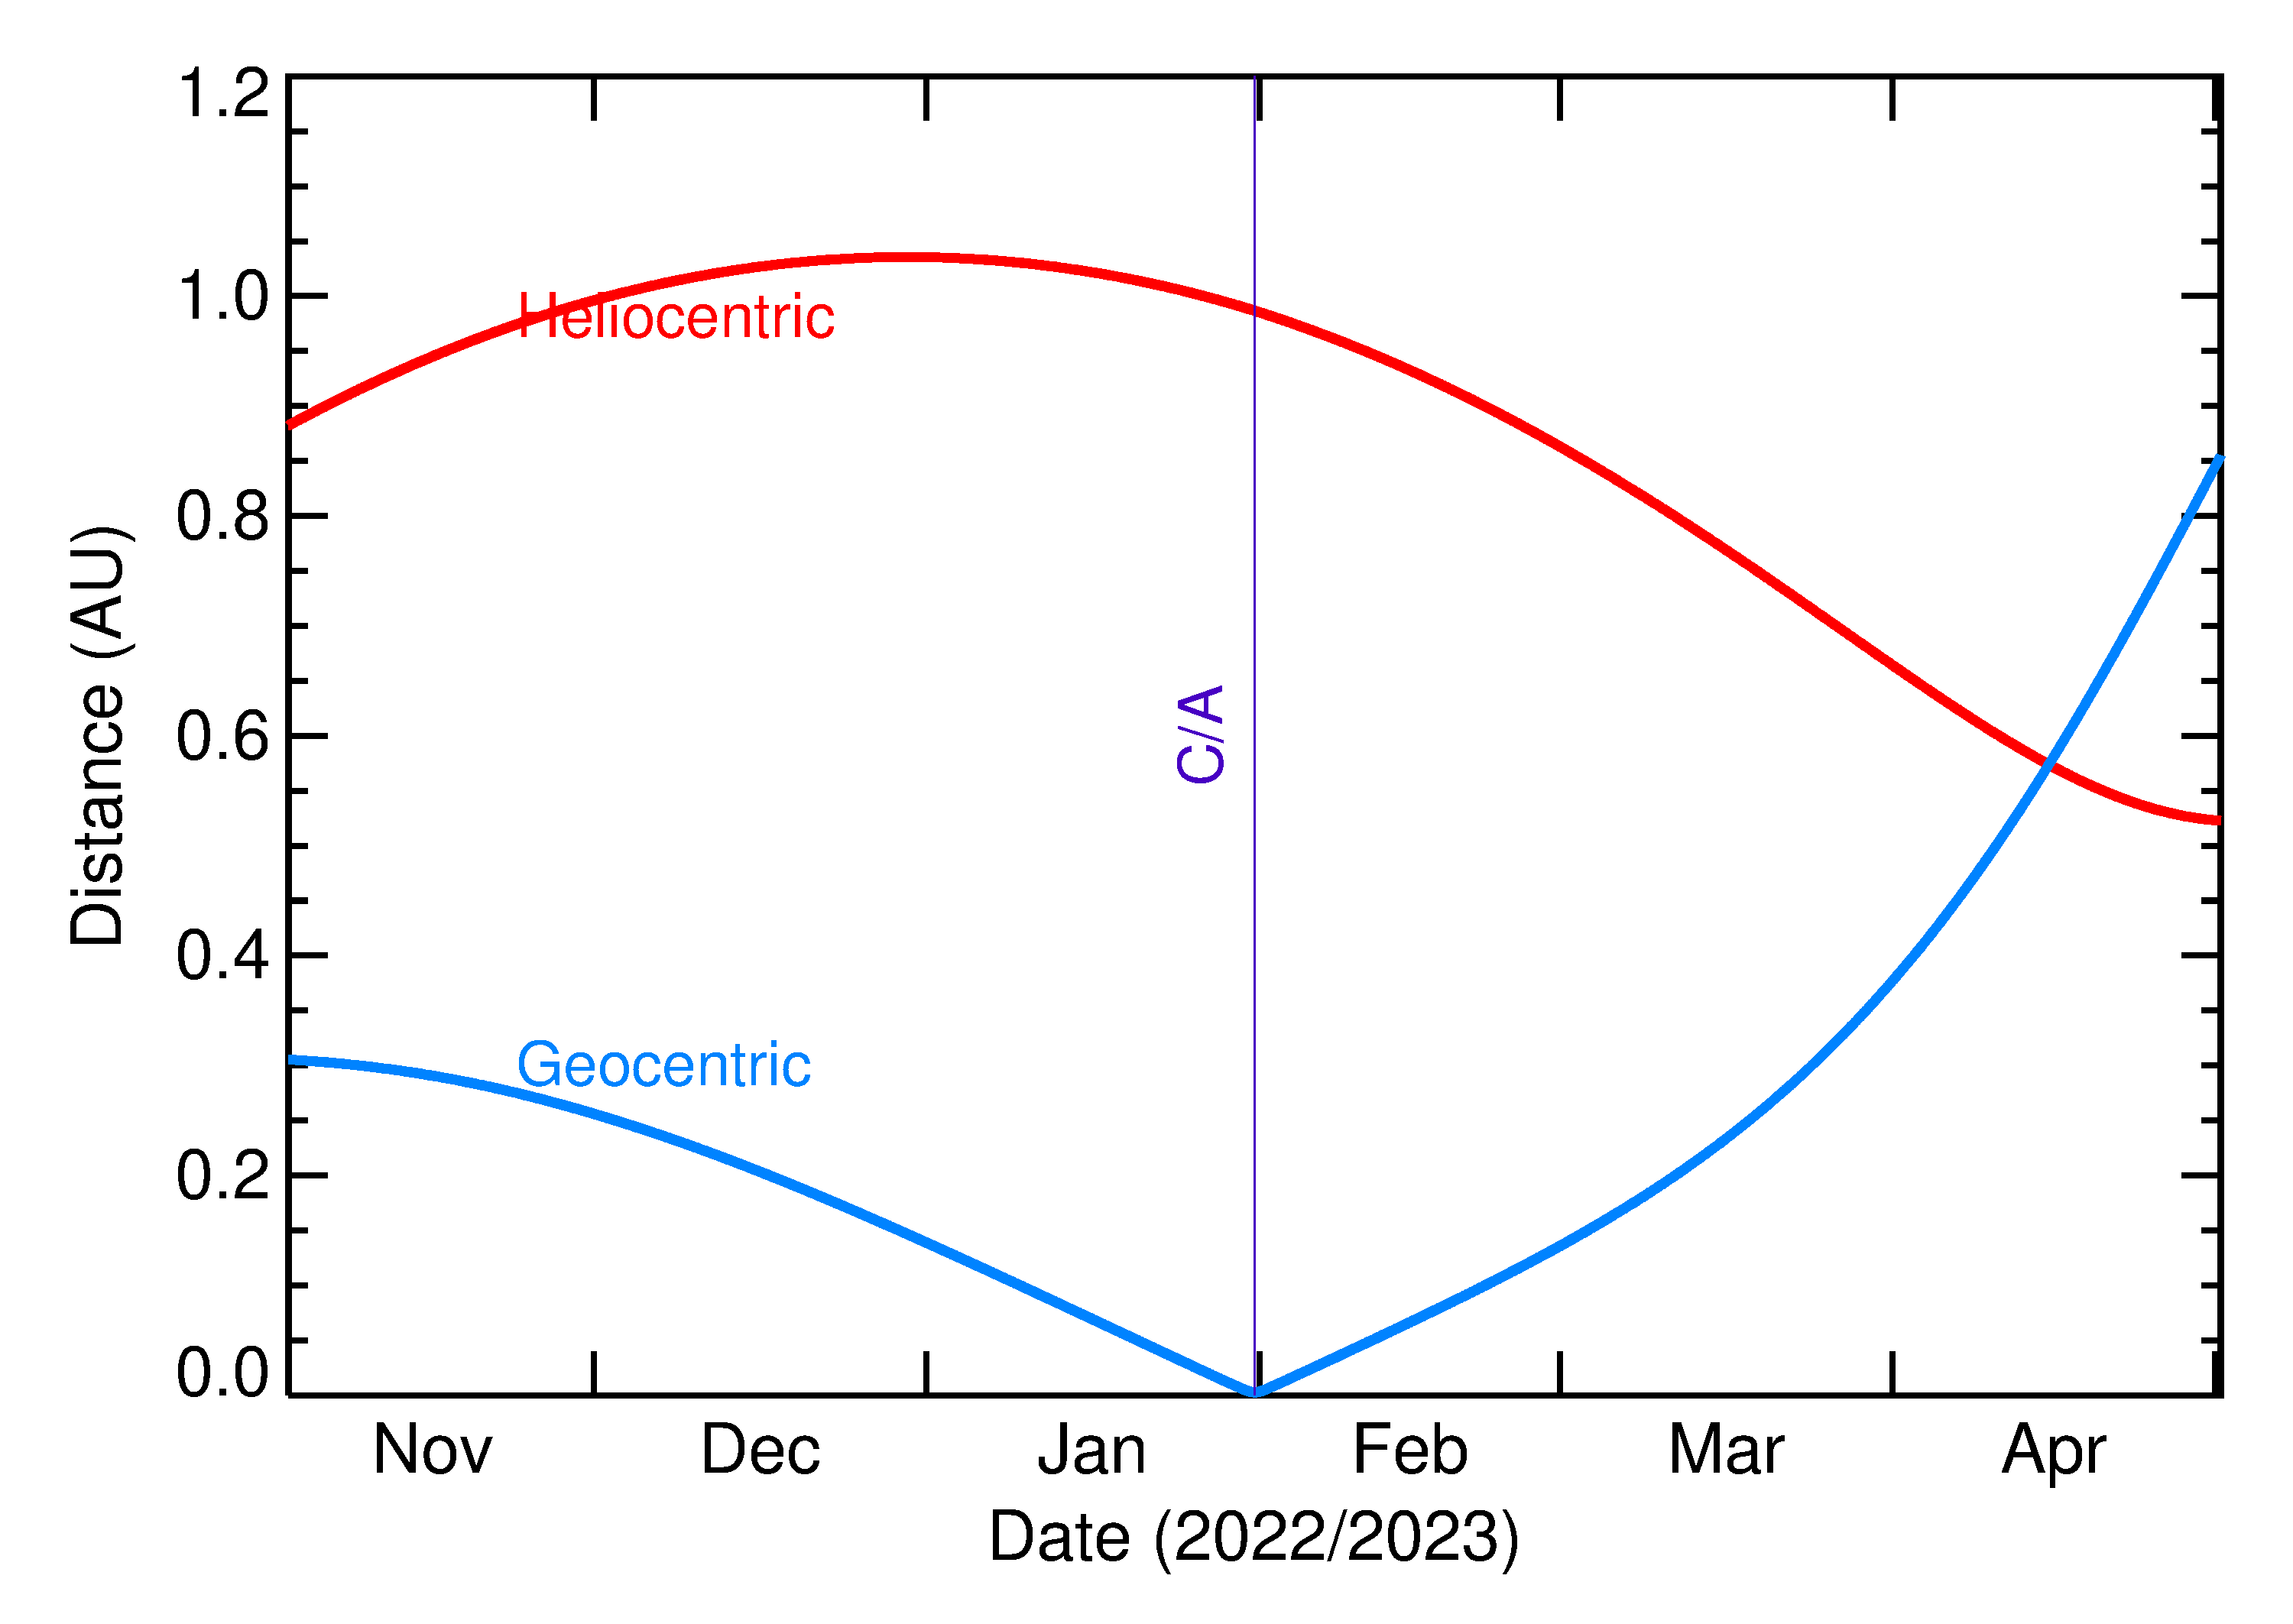 Heliocentric and Geocentric Distances of 2023 BJ7 in the months around closest approach